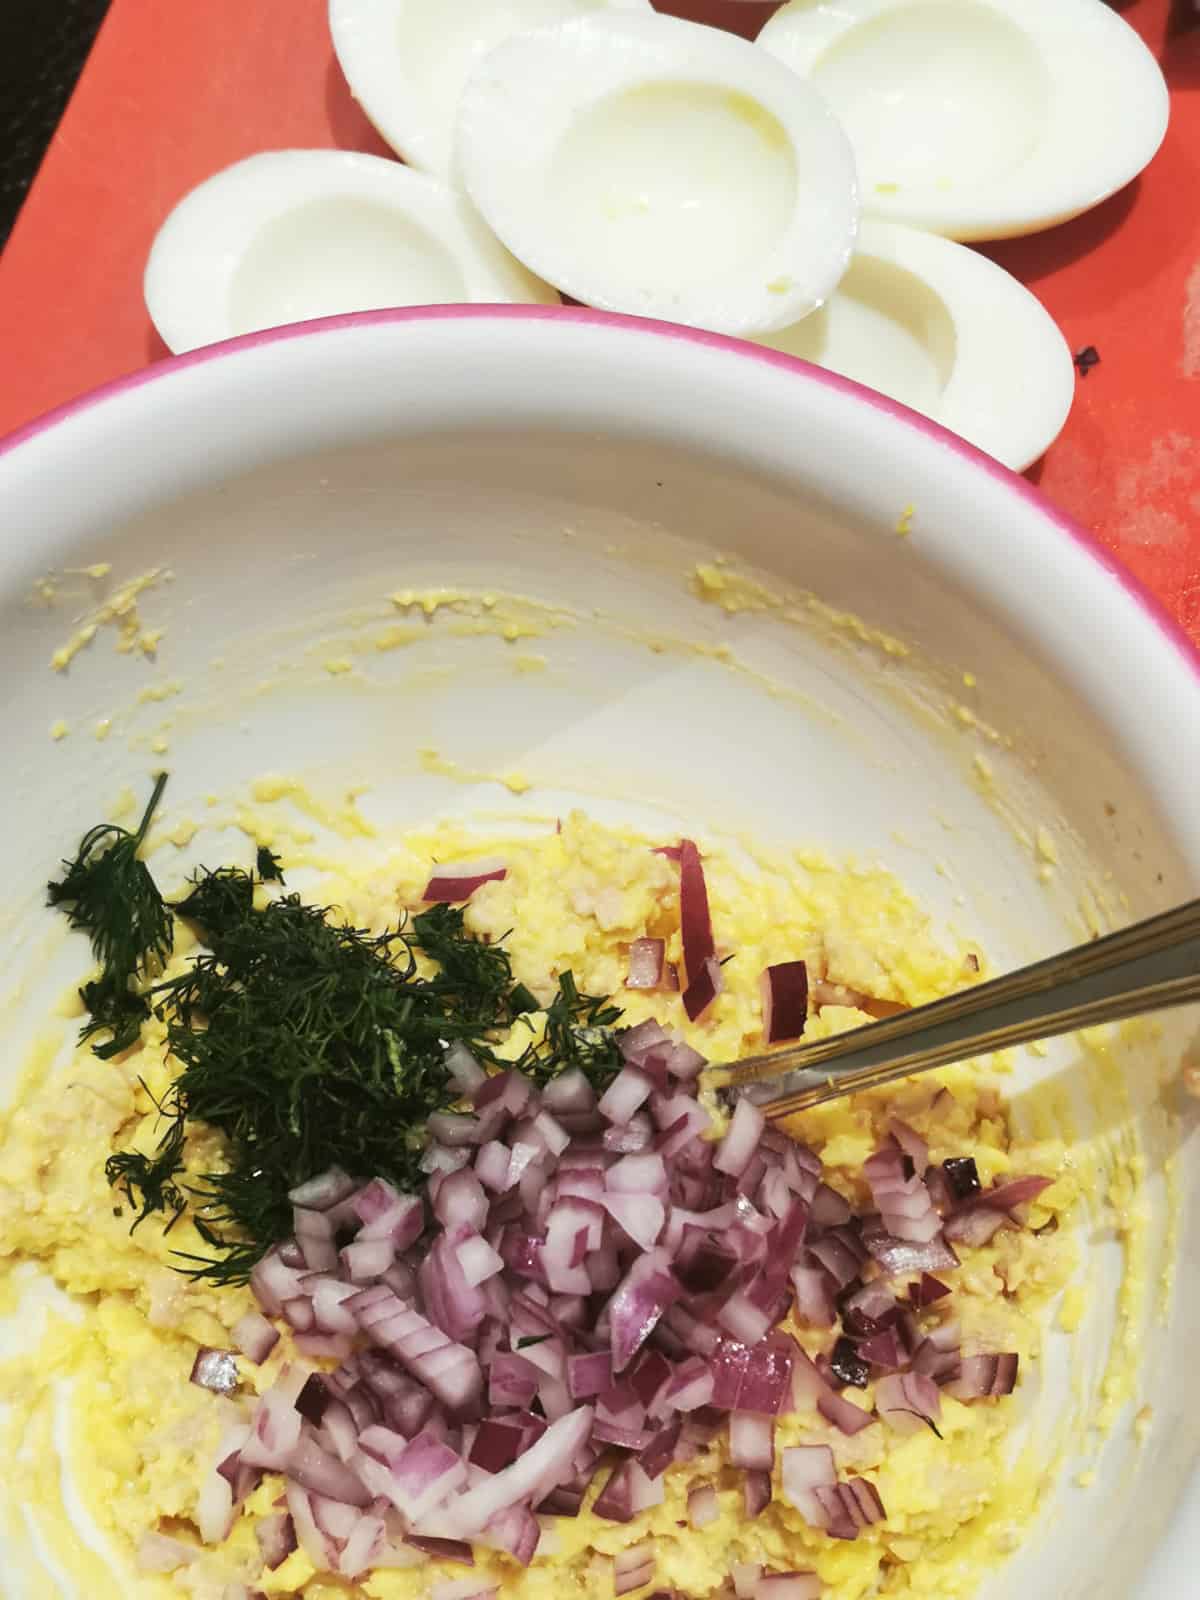 red onion and dill stirred into a pink bowl with cod liver and egg yolks